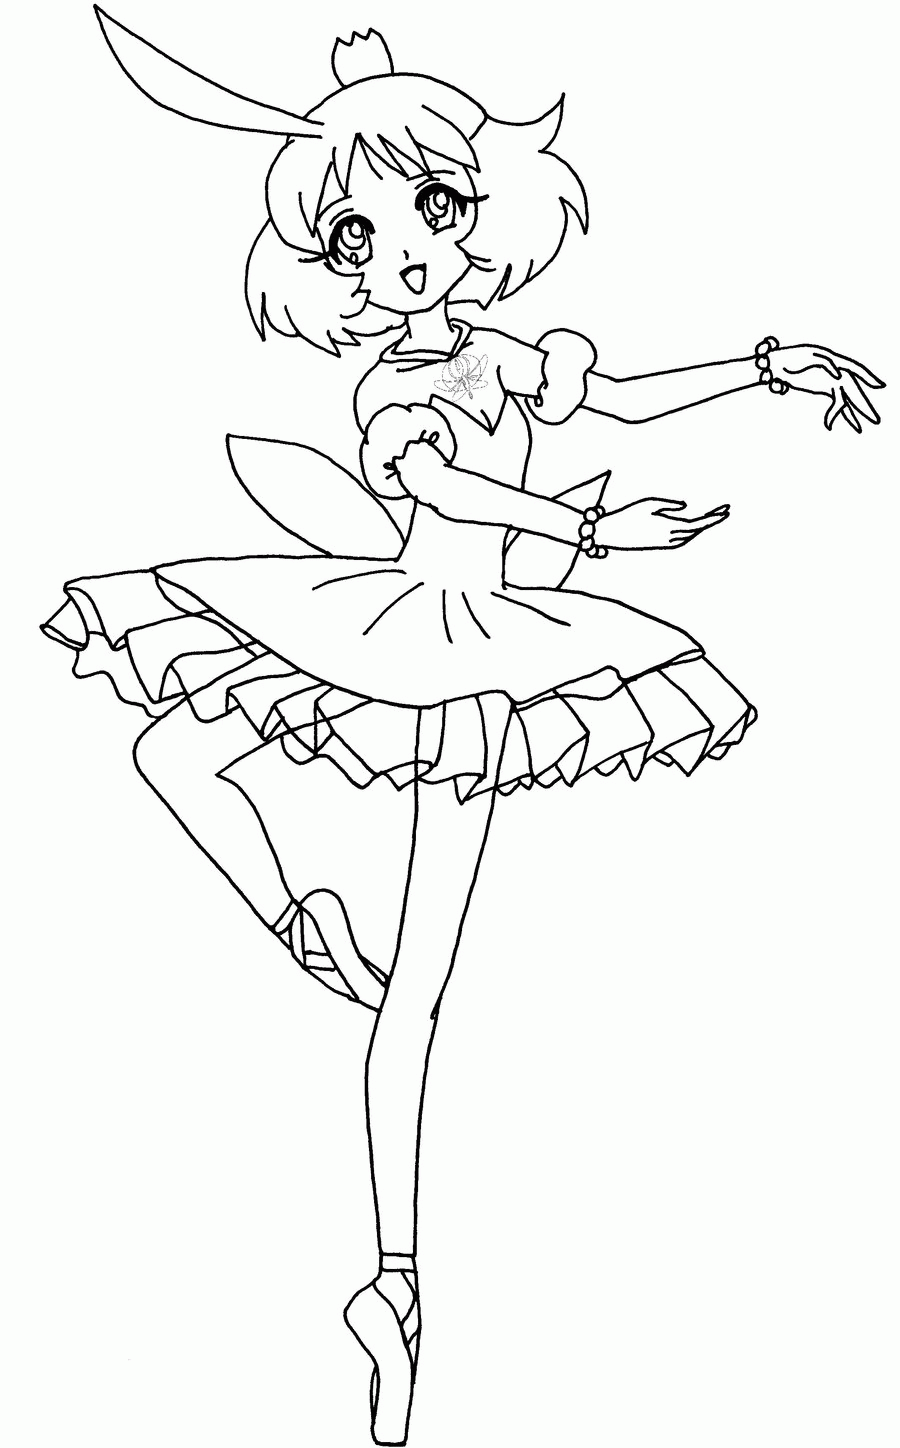 7 Pics of Anime Princess Coloring Pages - Sailor Moon Coloring ...